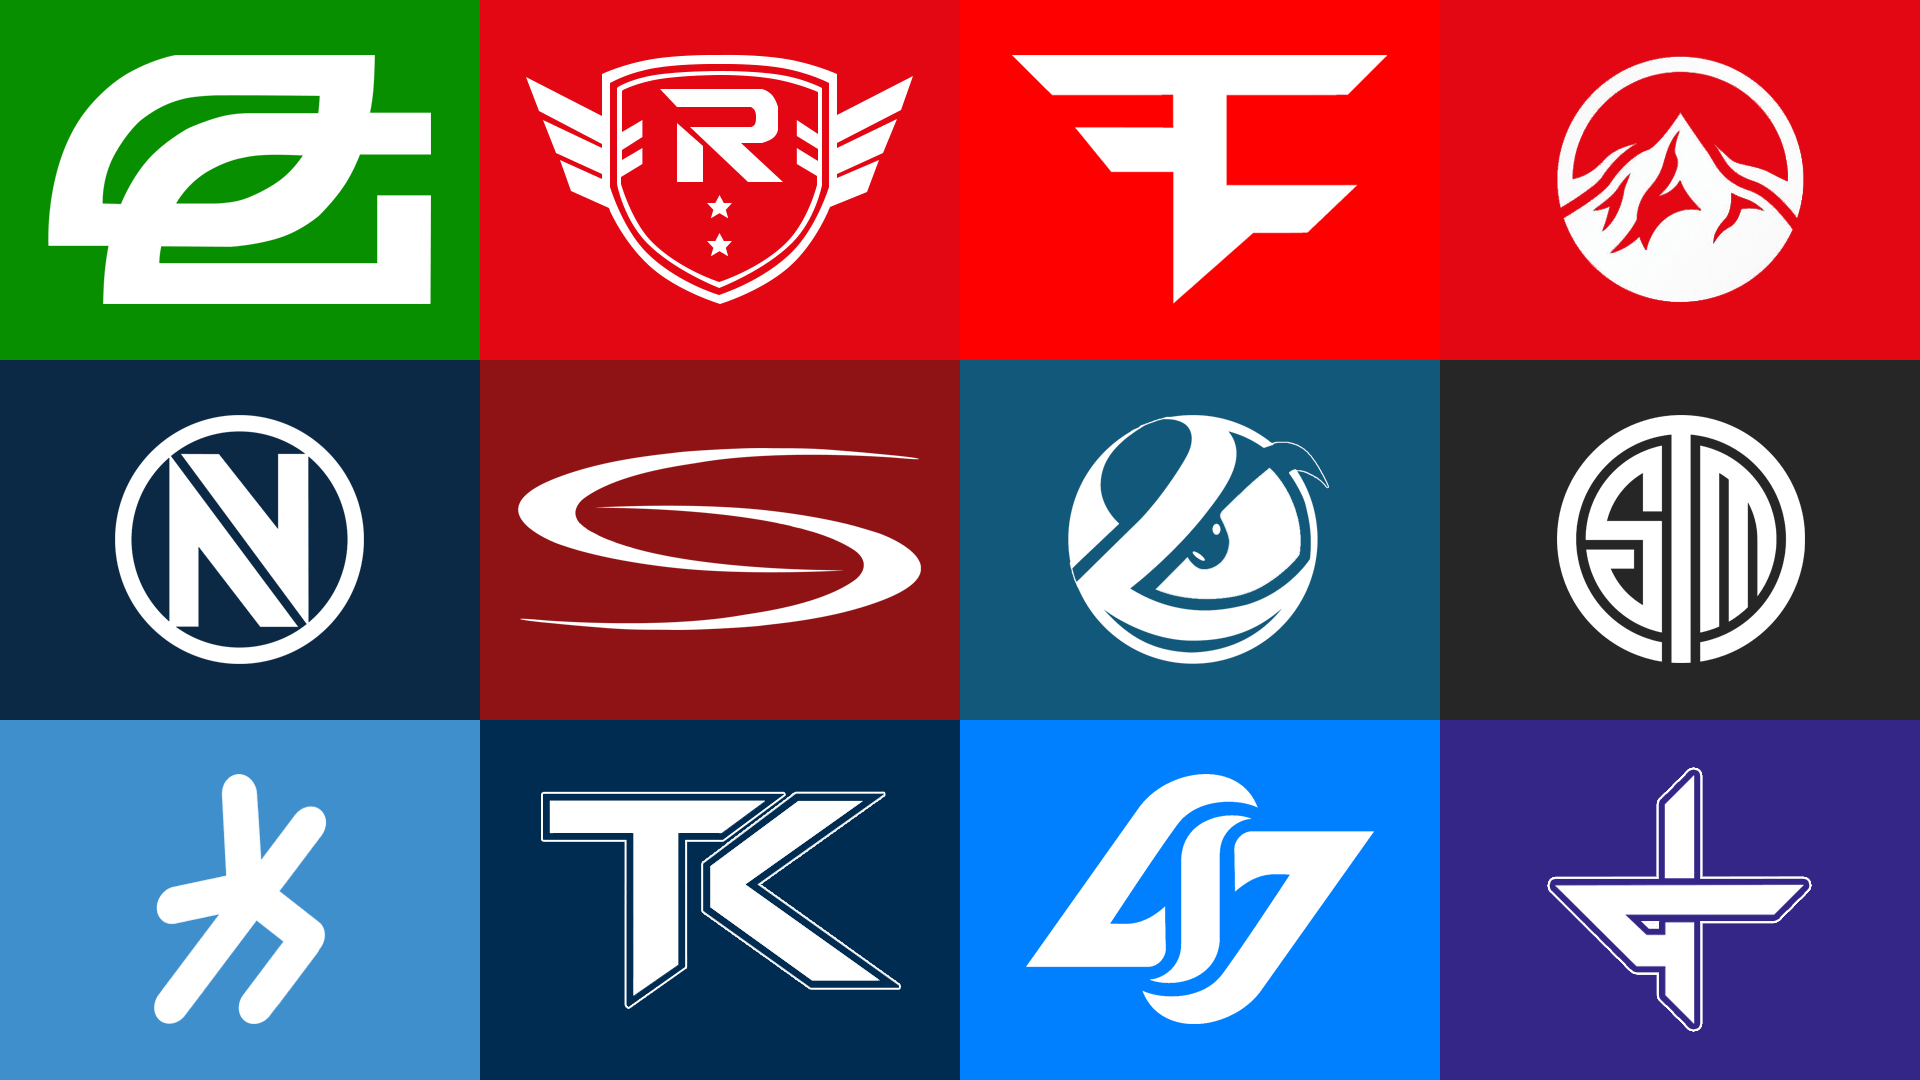 MLG Team Logo - Wallpaper for all the NA CWL Teams! : CoDCompetitive